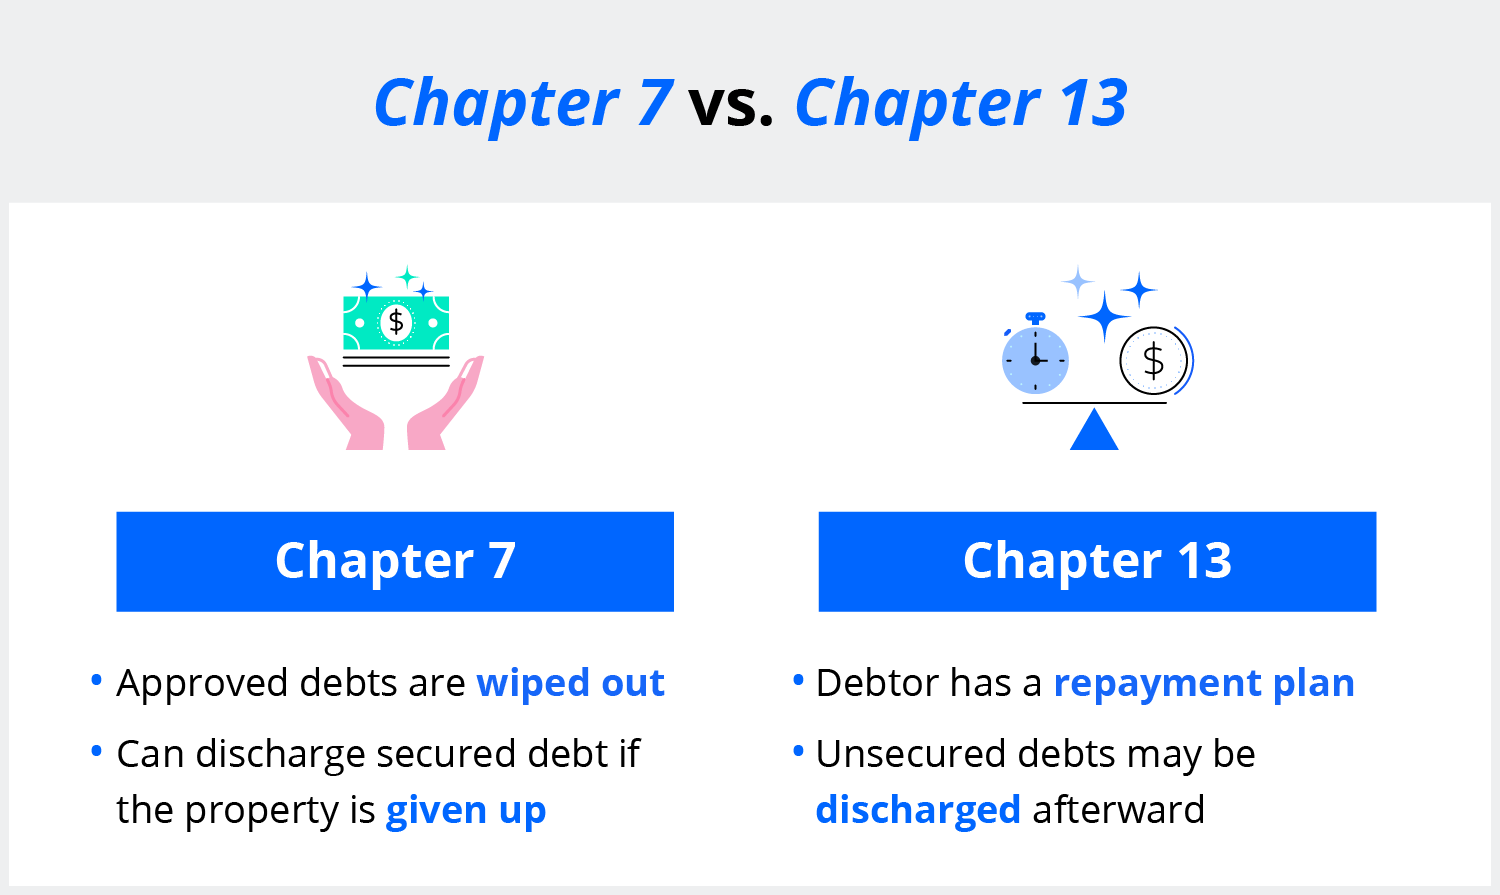 Differences between Chapter 7 and Chapter 13 bankruptcies